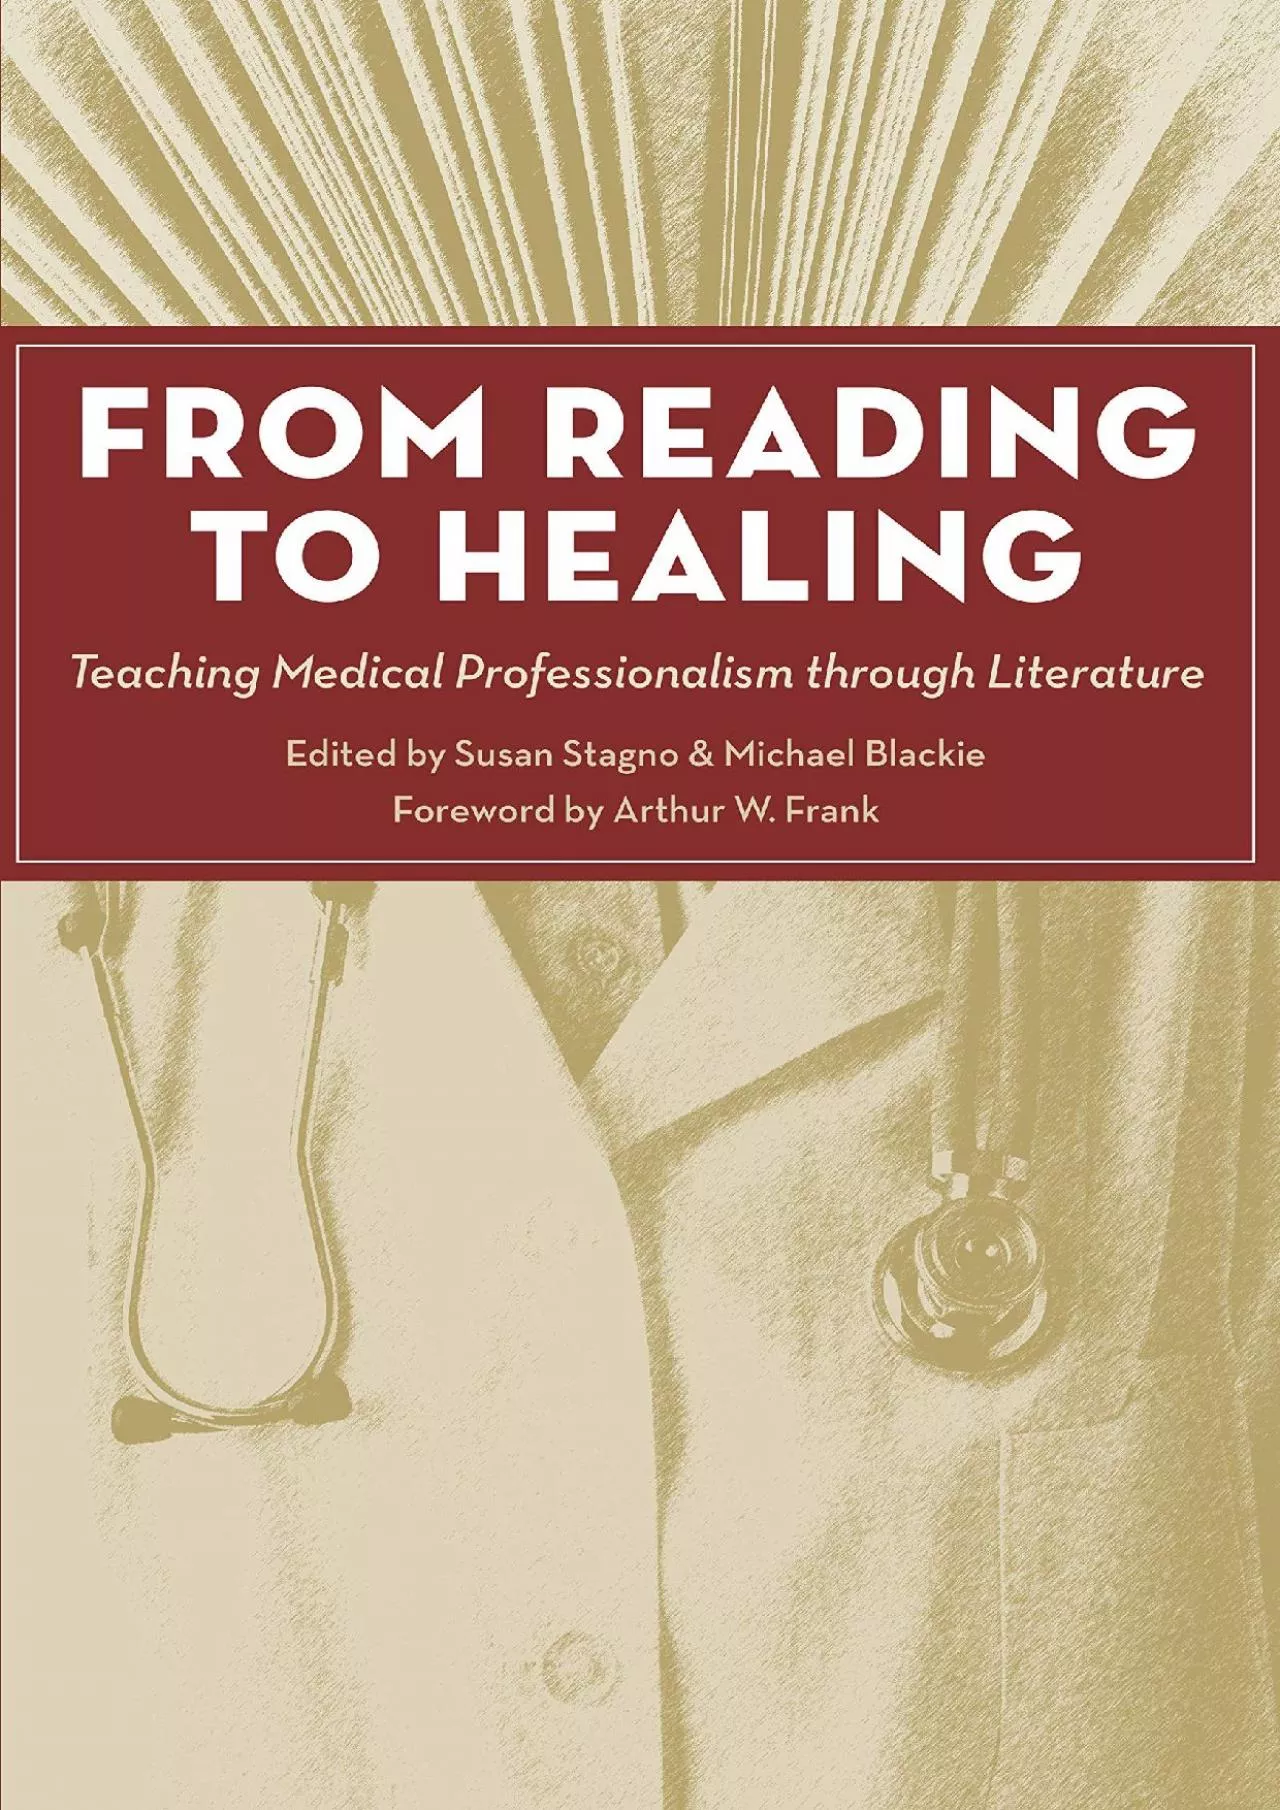 (DOWNLOAD)-From Reading to Healing: Teaching Medical Professionalism through Literature